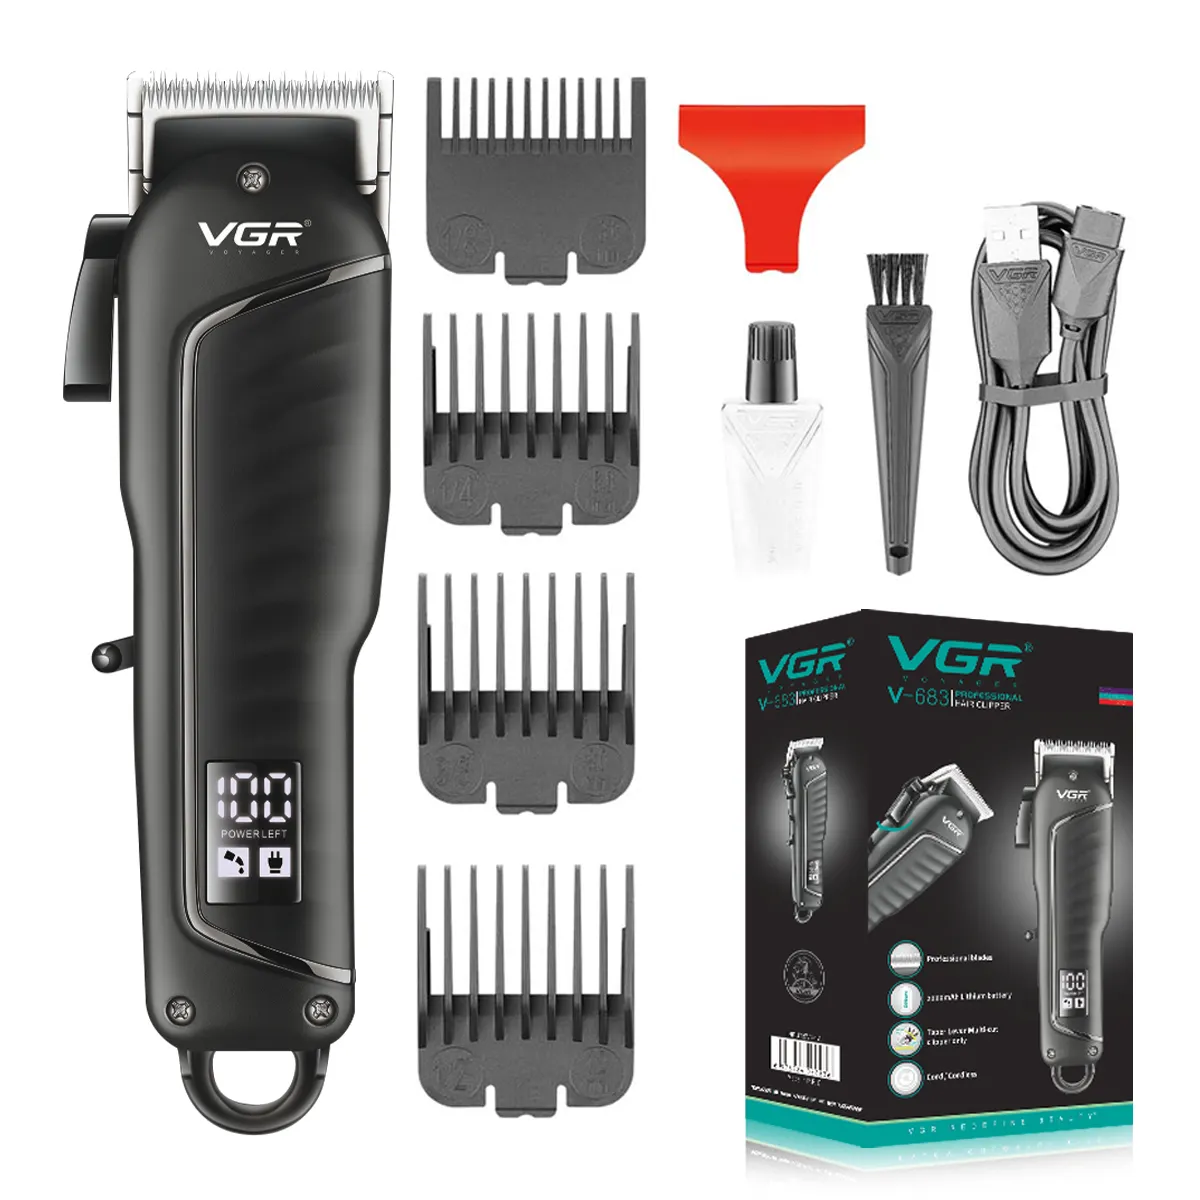 VGR V-683 hair cutting  machine electric trimmer professional powerful cordless rechargeable barber hair clipper for men